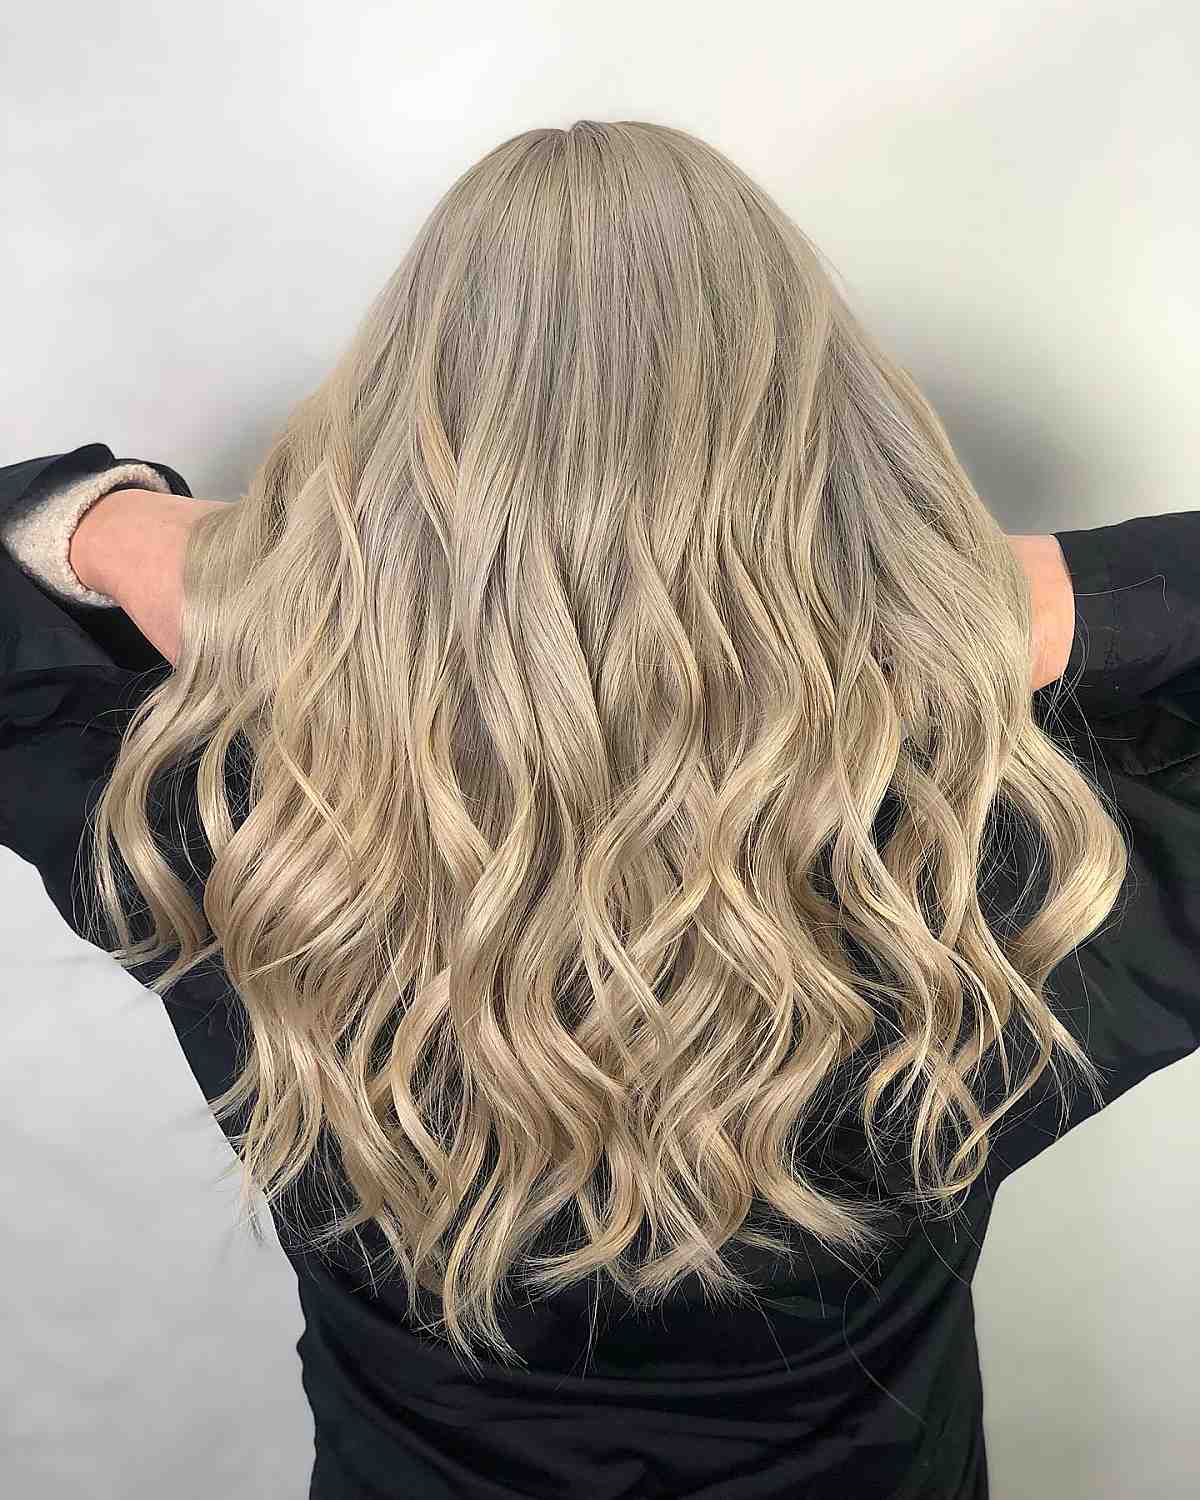 tousled smooth curly waves